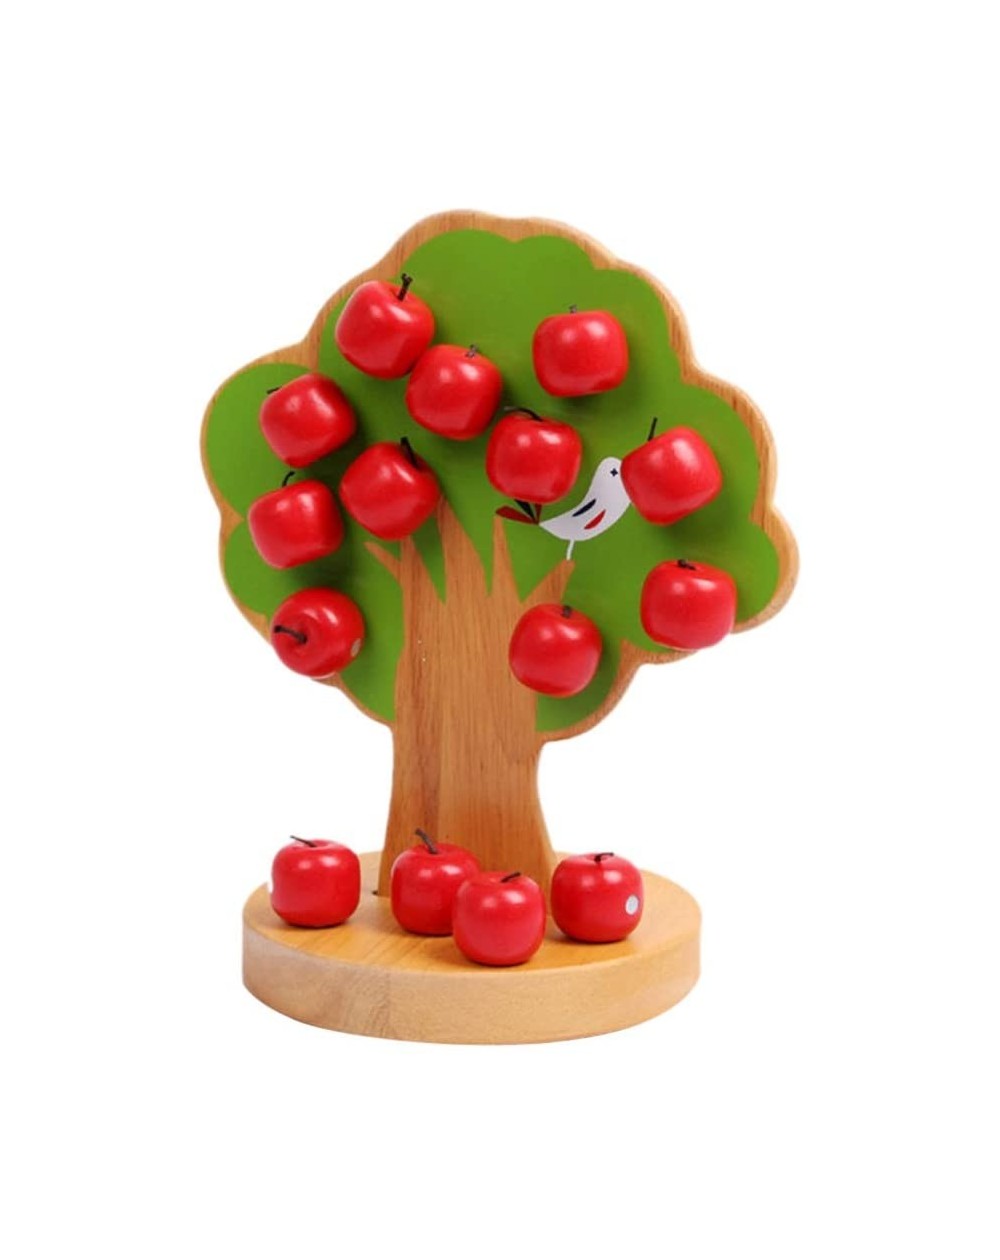 Favors 1pc Kids Baby Magnetic Wooden Apple Tree Preschool Training Educational Toy Set Toys DIY Building Blocks Playset for T...